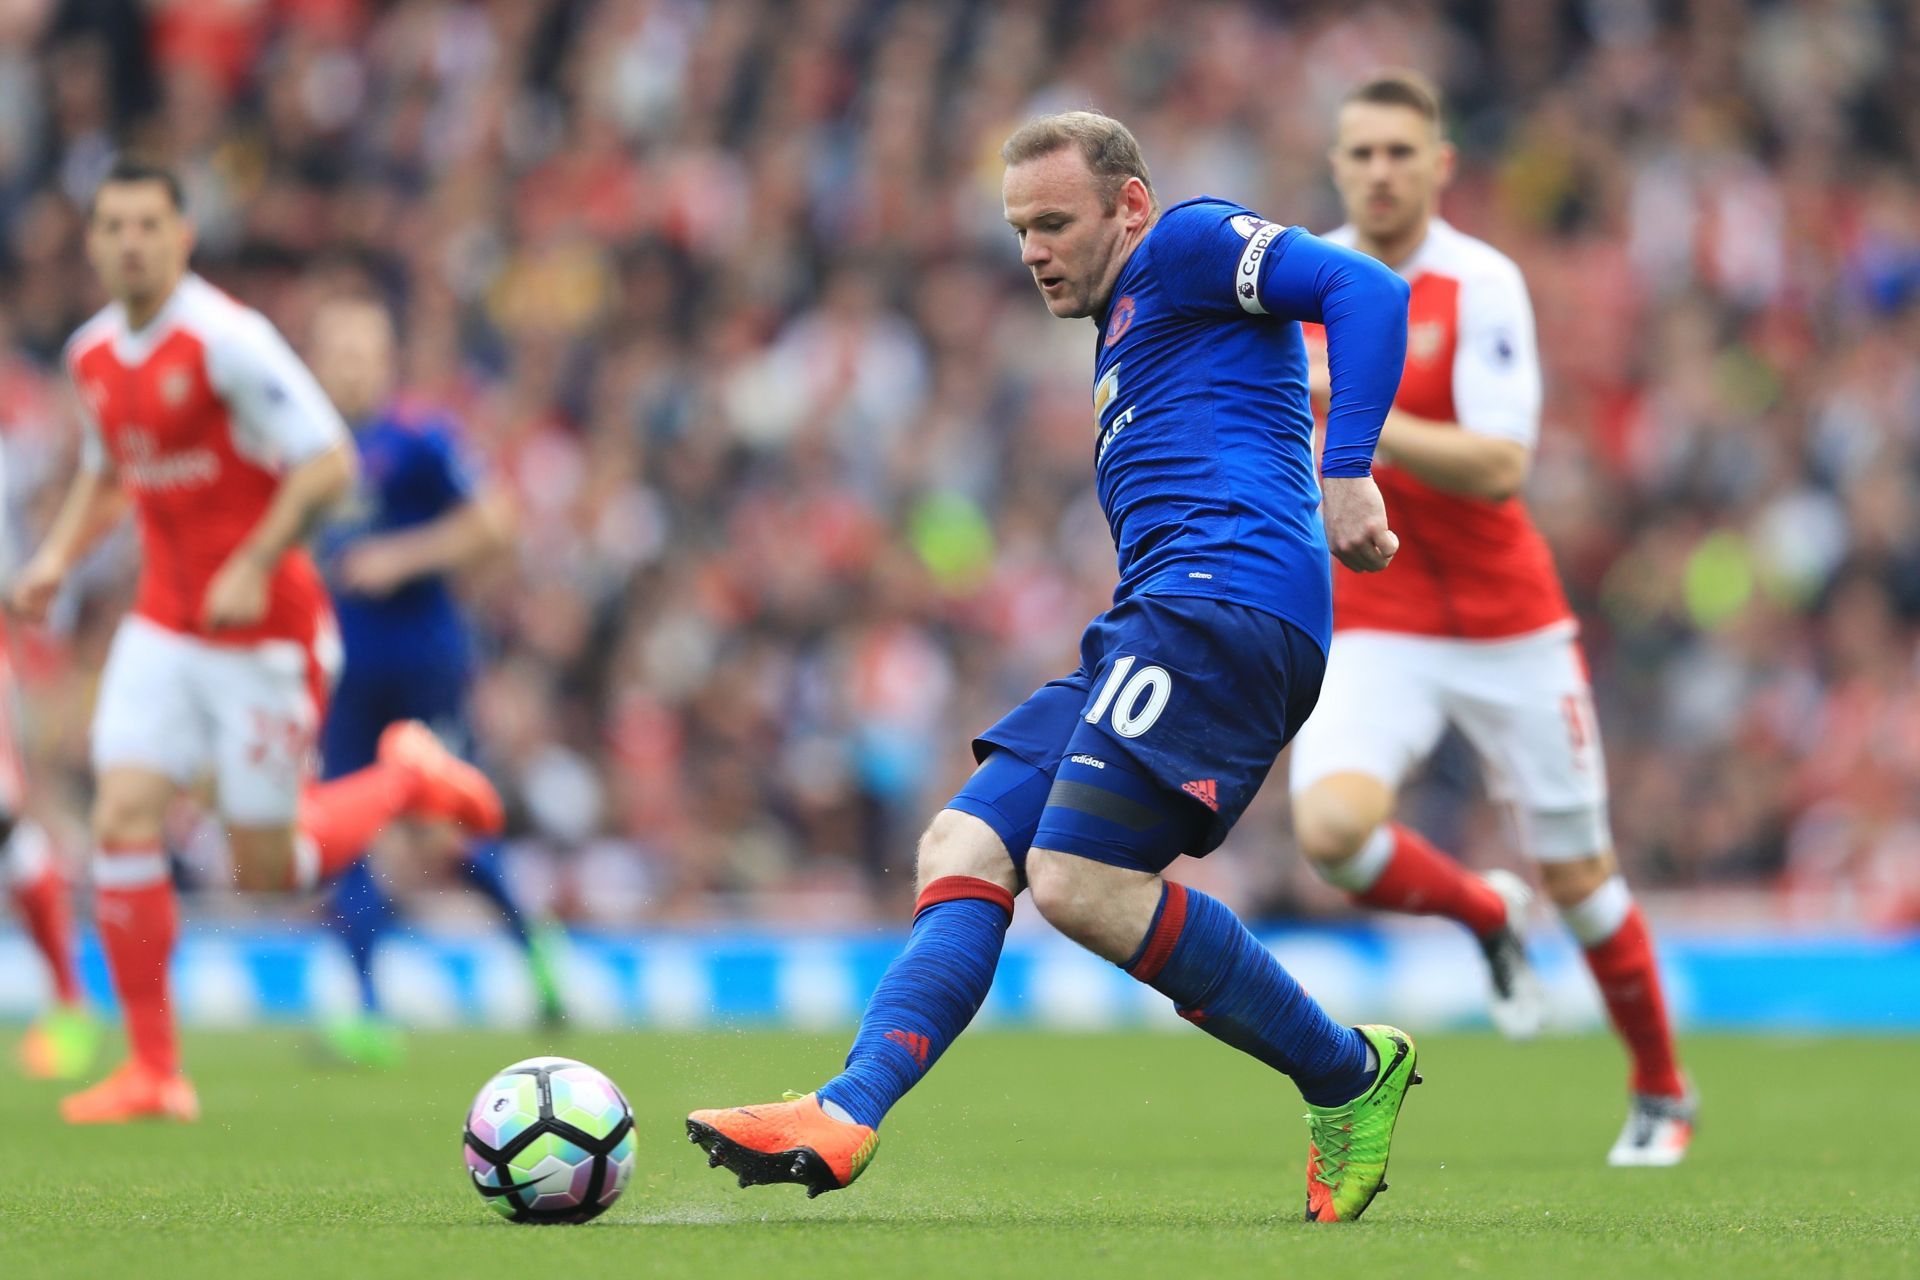 Wayne Rooney loved playing against the Gunners.